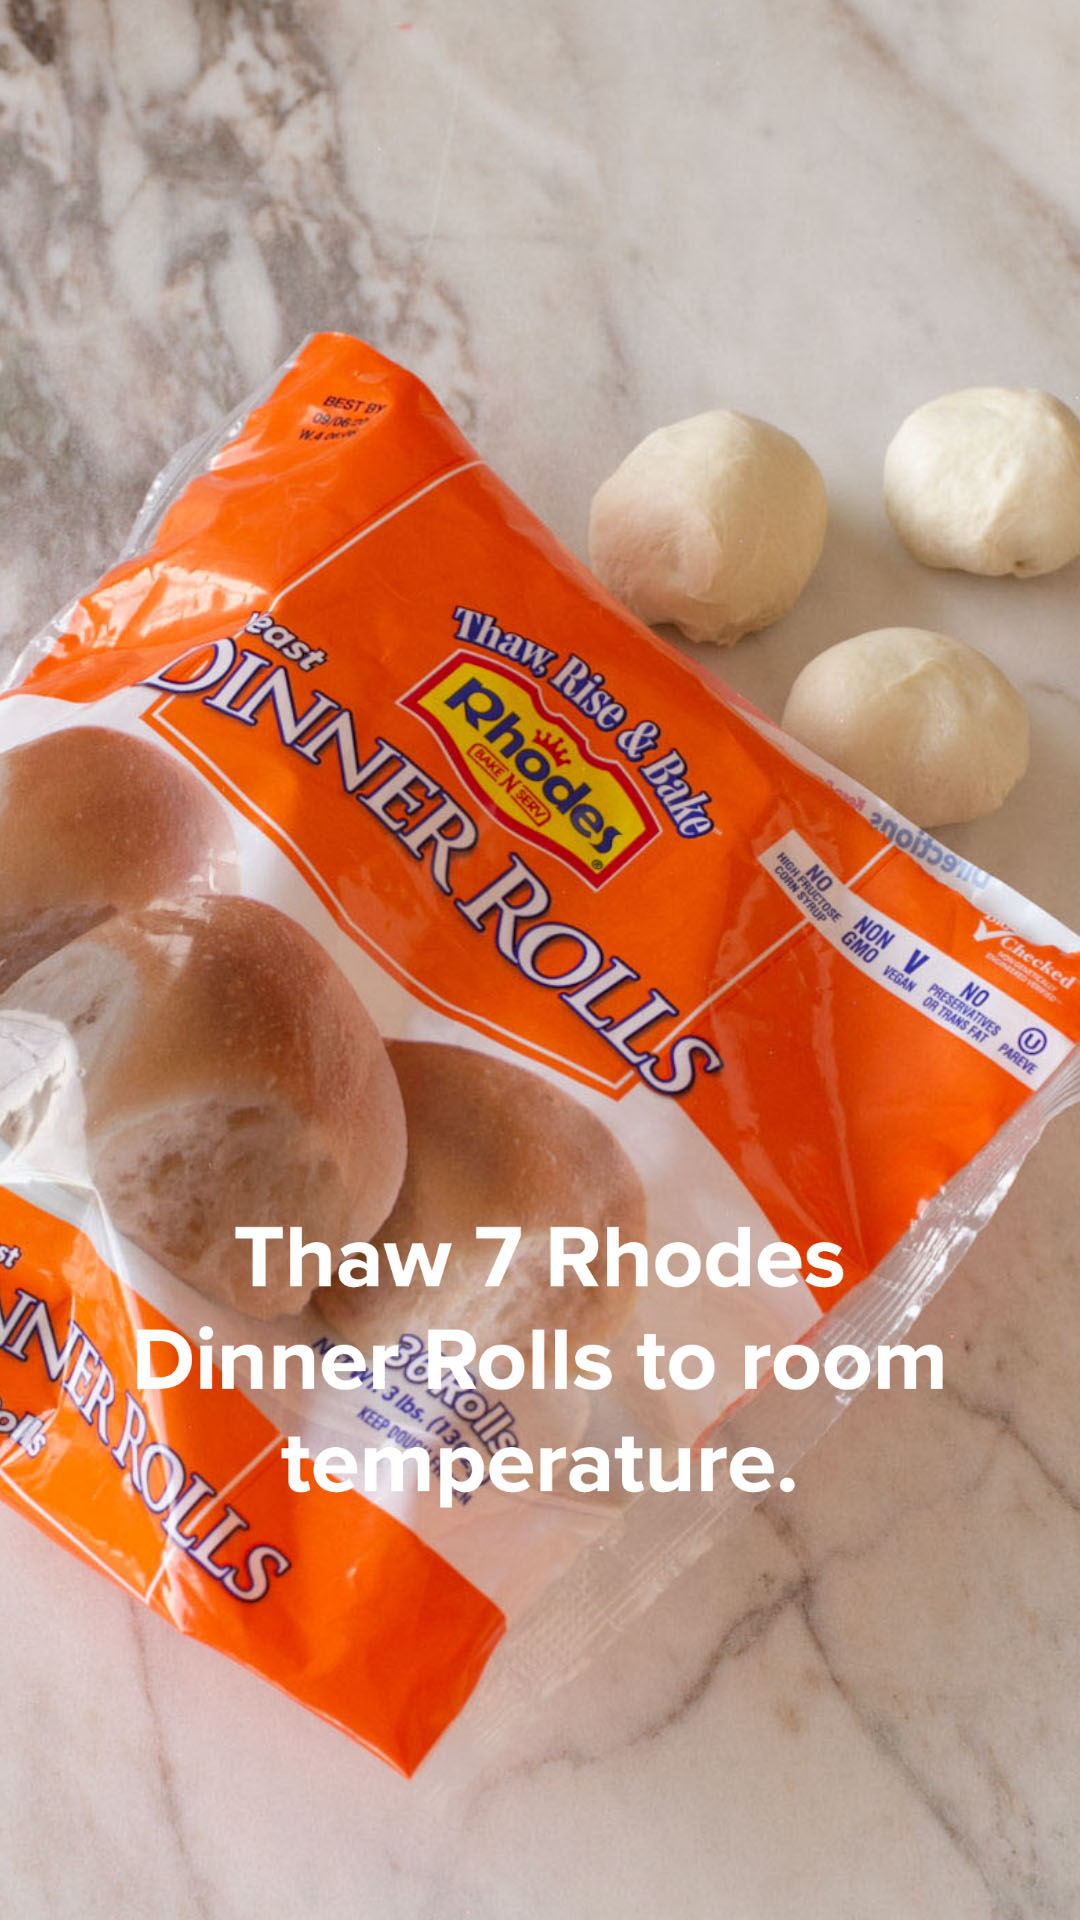 Package of Dinner Rolls on counter.